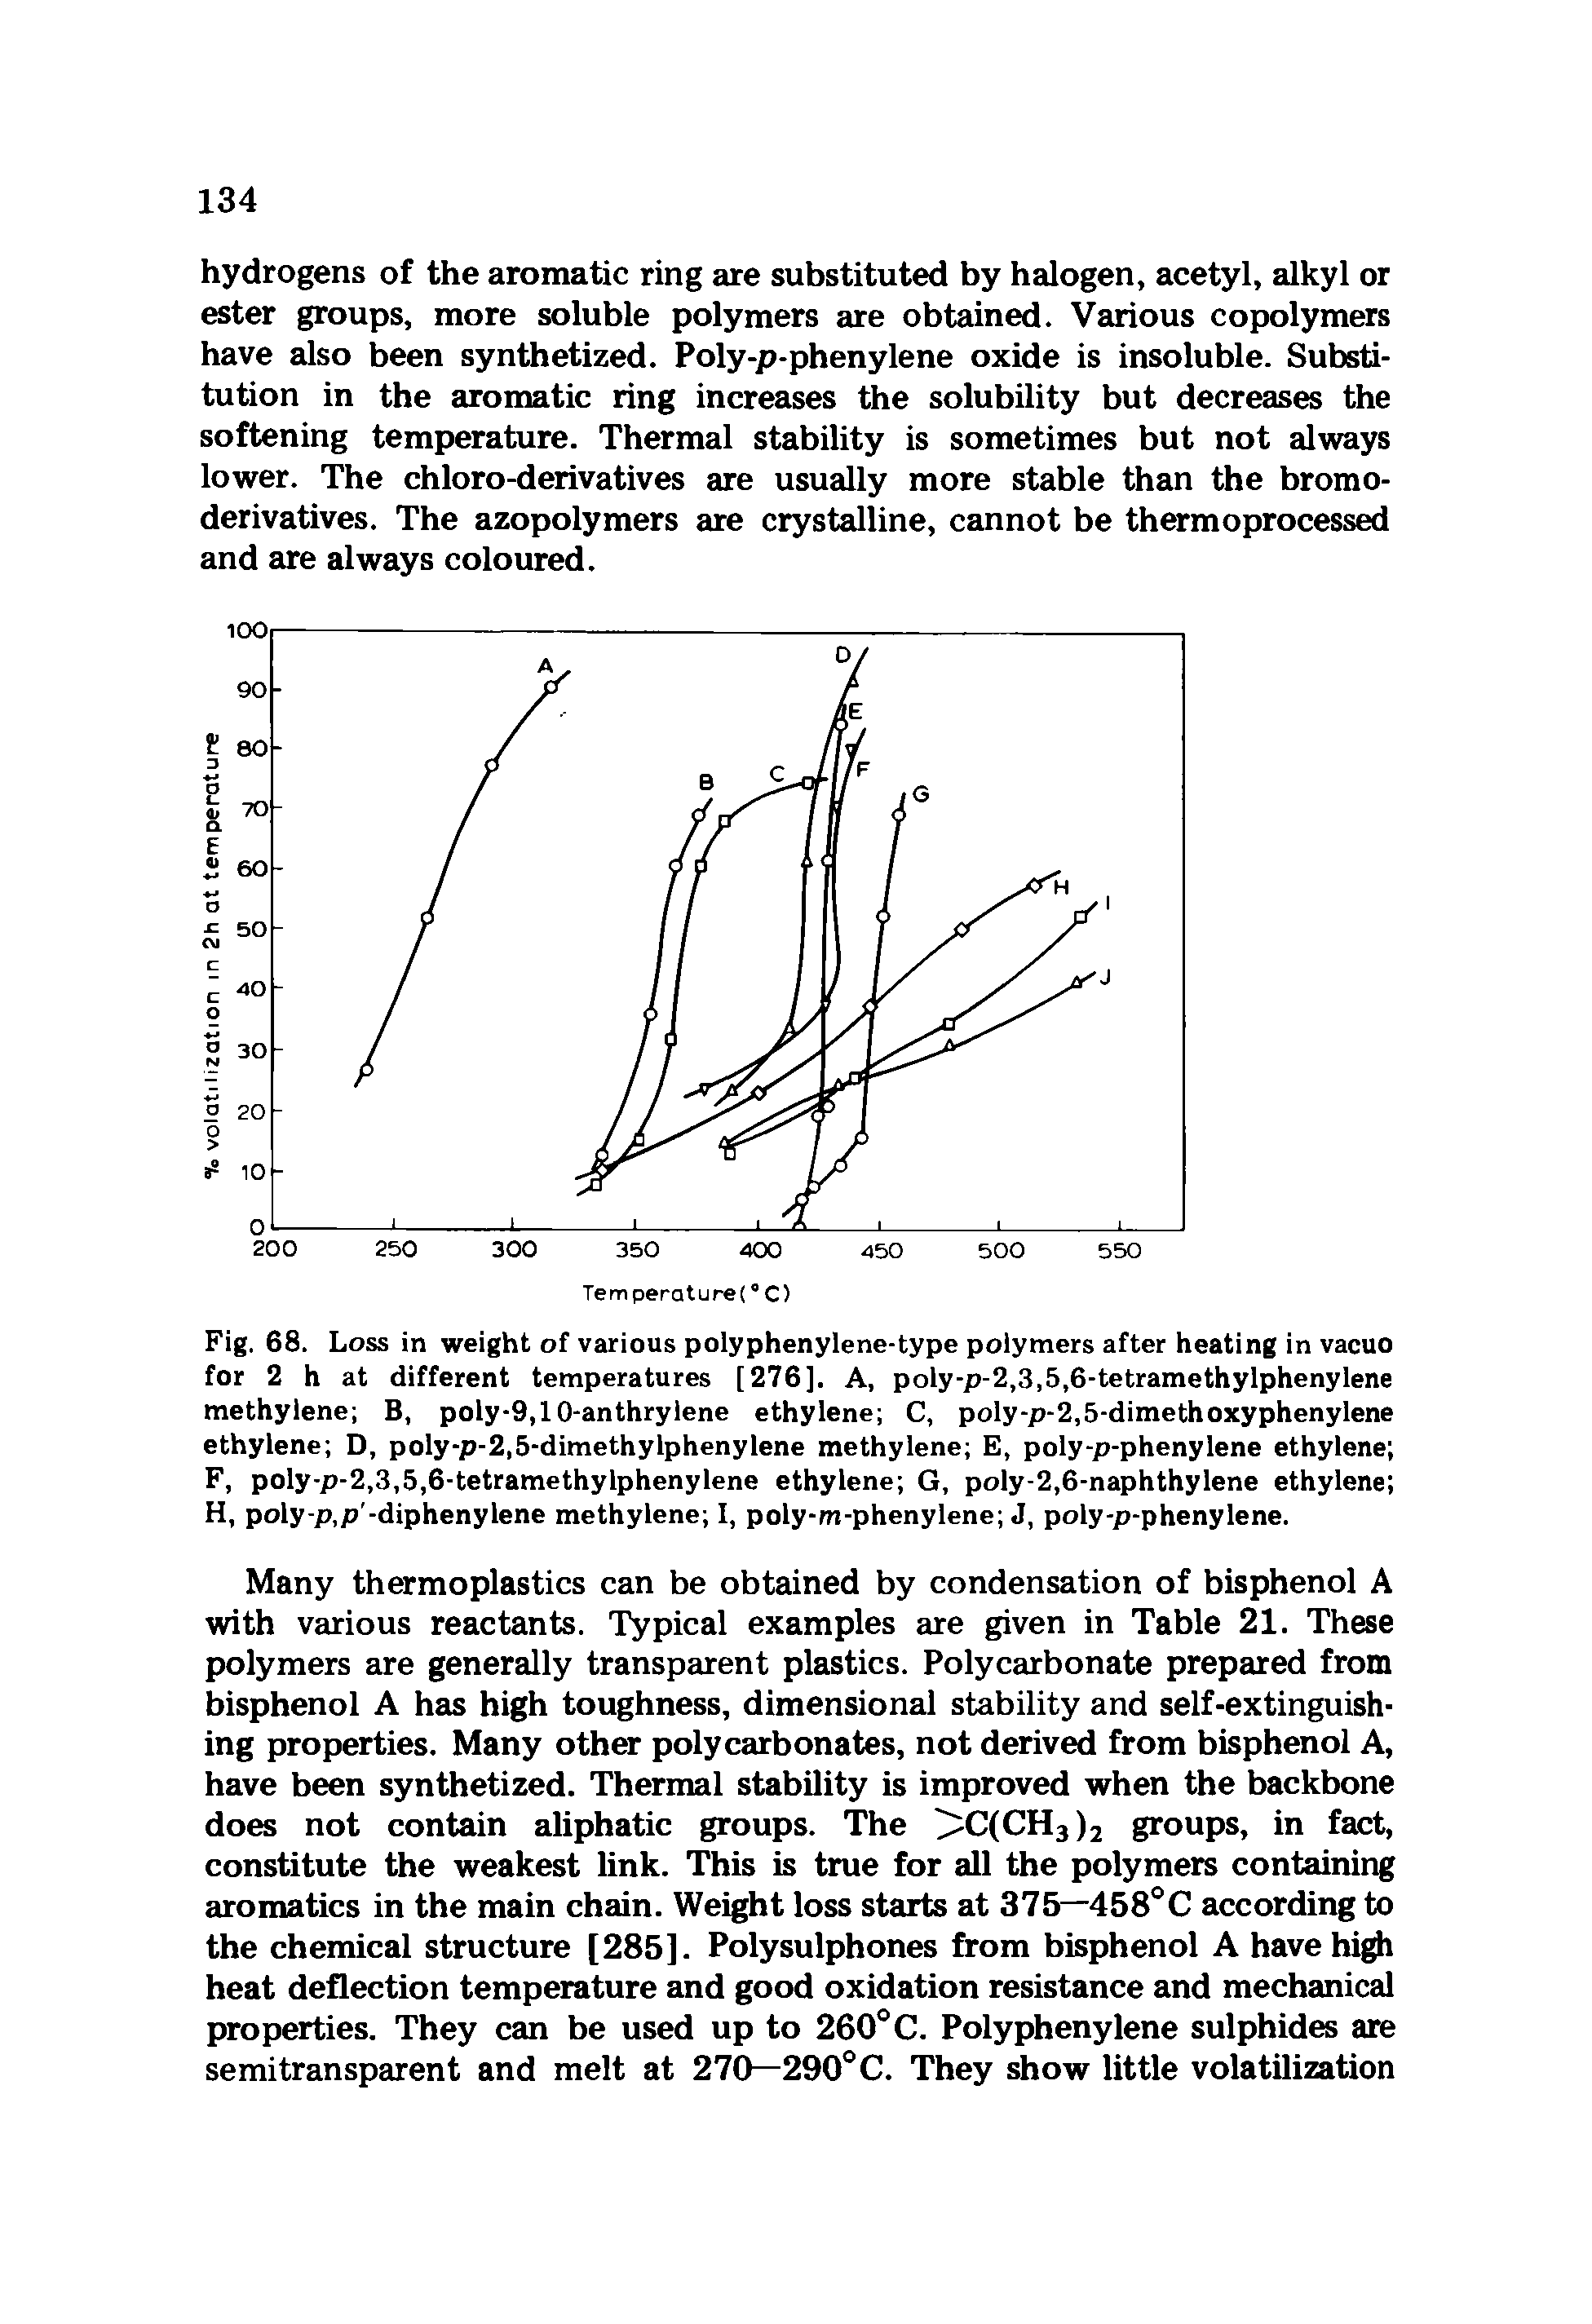 Fig. 68. Loss in weight of various polyphenylene-type polymers after heating in vacuo for 2 h at different temperatures [276]. A, poly-p-2,3,5,6-tetramethylphenylene methylene B, poly-9,10-anthrylene ethylene C, poly-p-2,5-dimethoxyphenylene ethylene D, poly-p-2,5-dimethylphenylene methylene E, poly-p-phenylene ethylene F, poly-p-2,3,5,6-tetramethylphenylene ethylene G, poly-2,6-naphthylene ethylene H, poly-p,p -diphenylene methylene I, poly-m-phenylene J, poly-p-phenylene.